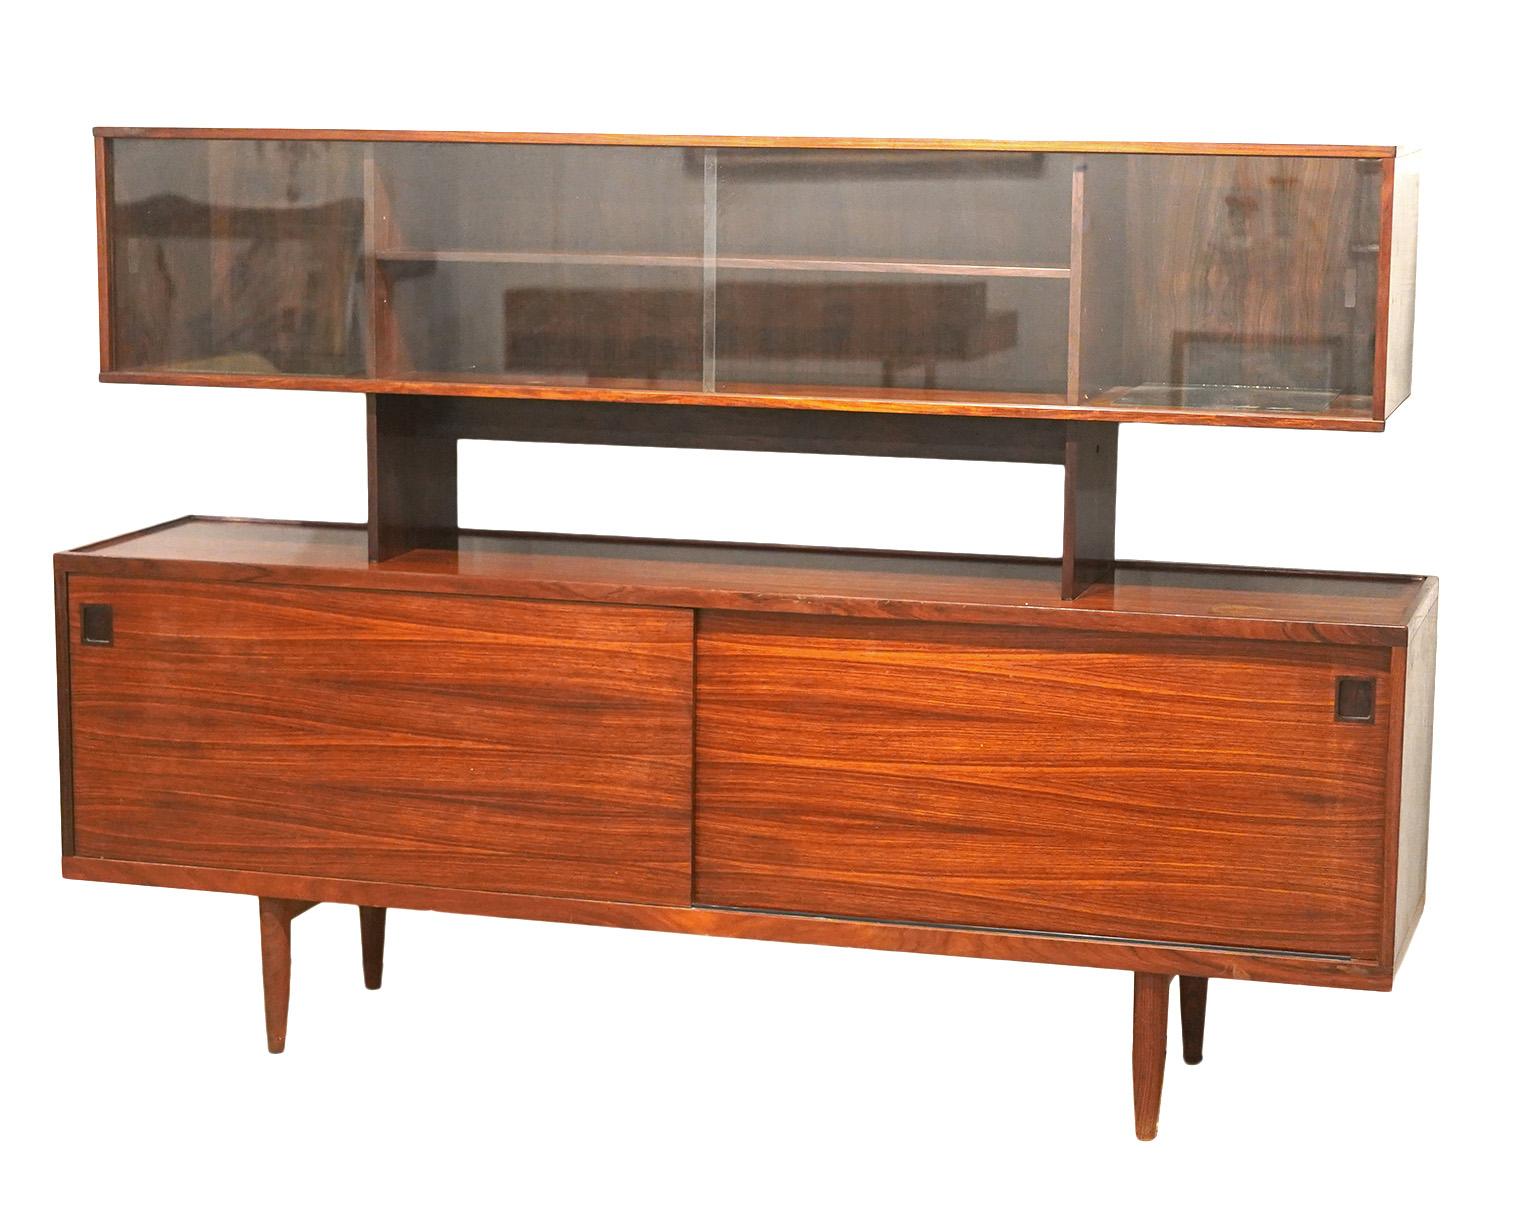 Mid Century Modern Peter Lovig Nielson Danish Rosewood Sideboard Credenza. Top has glass doors to use as a display cabinet. Bottom is hidden storage with shelves and doors. Top display has two mirrors on shelves that are attached. Minor wear. Couple